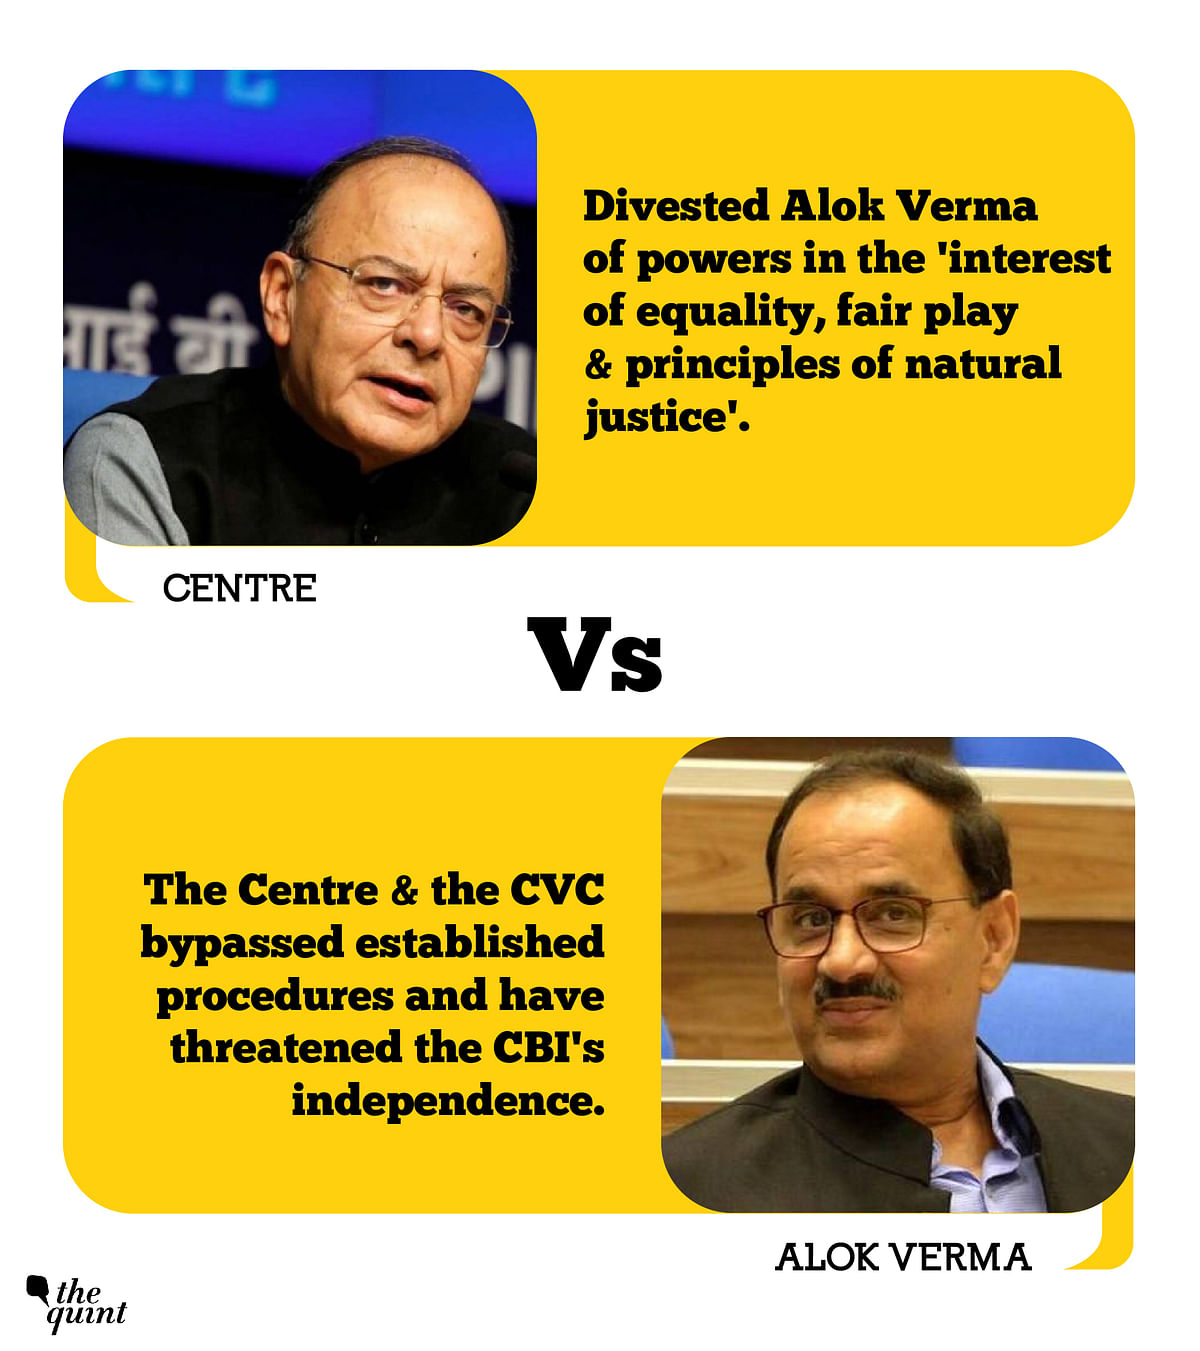 Here’s how the contest between Alok Verma and the Centre looks like at the moment.